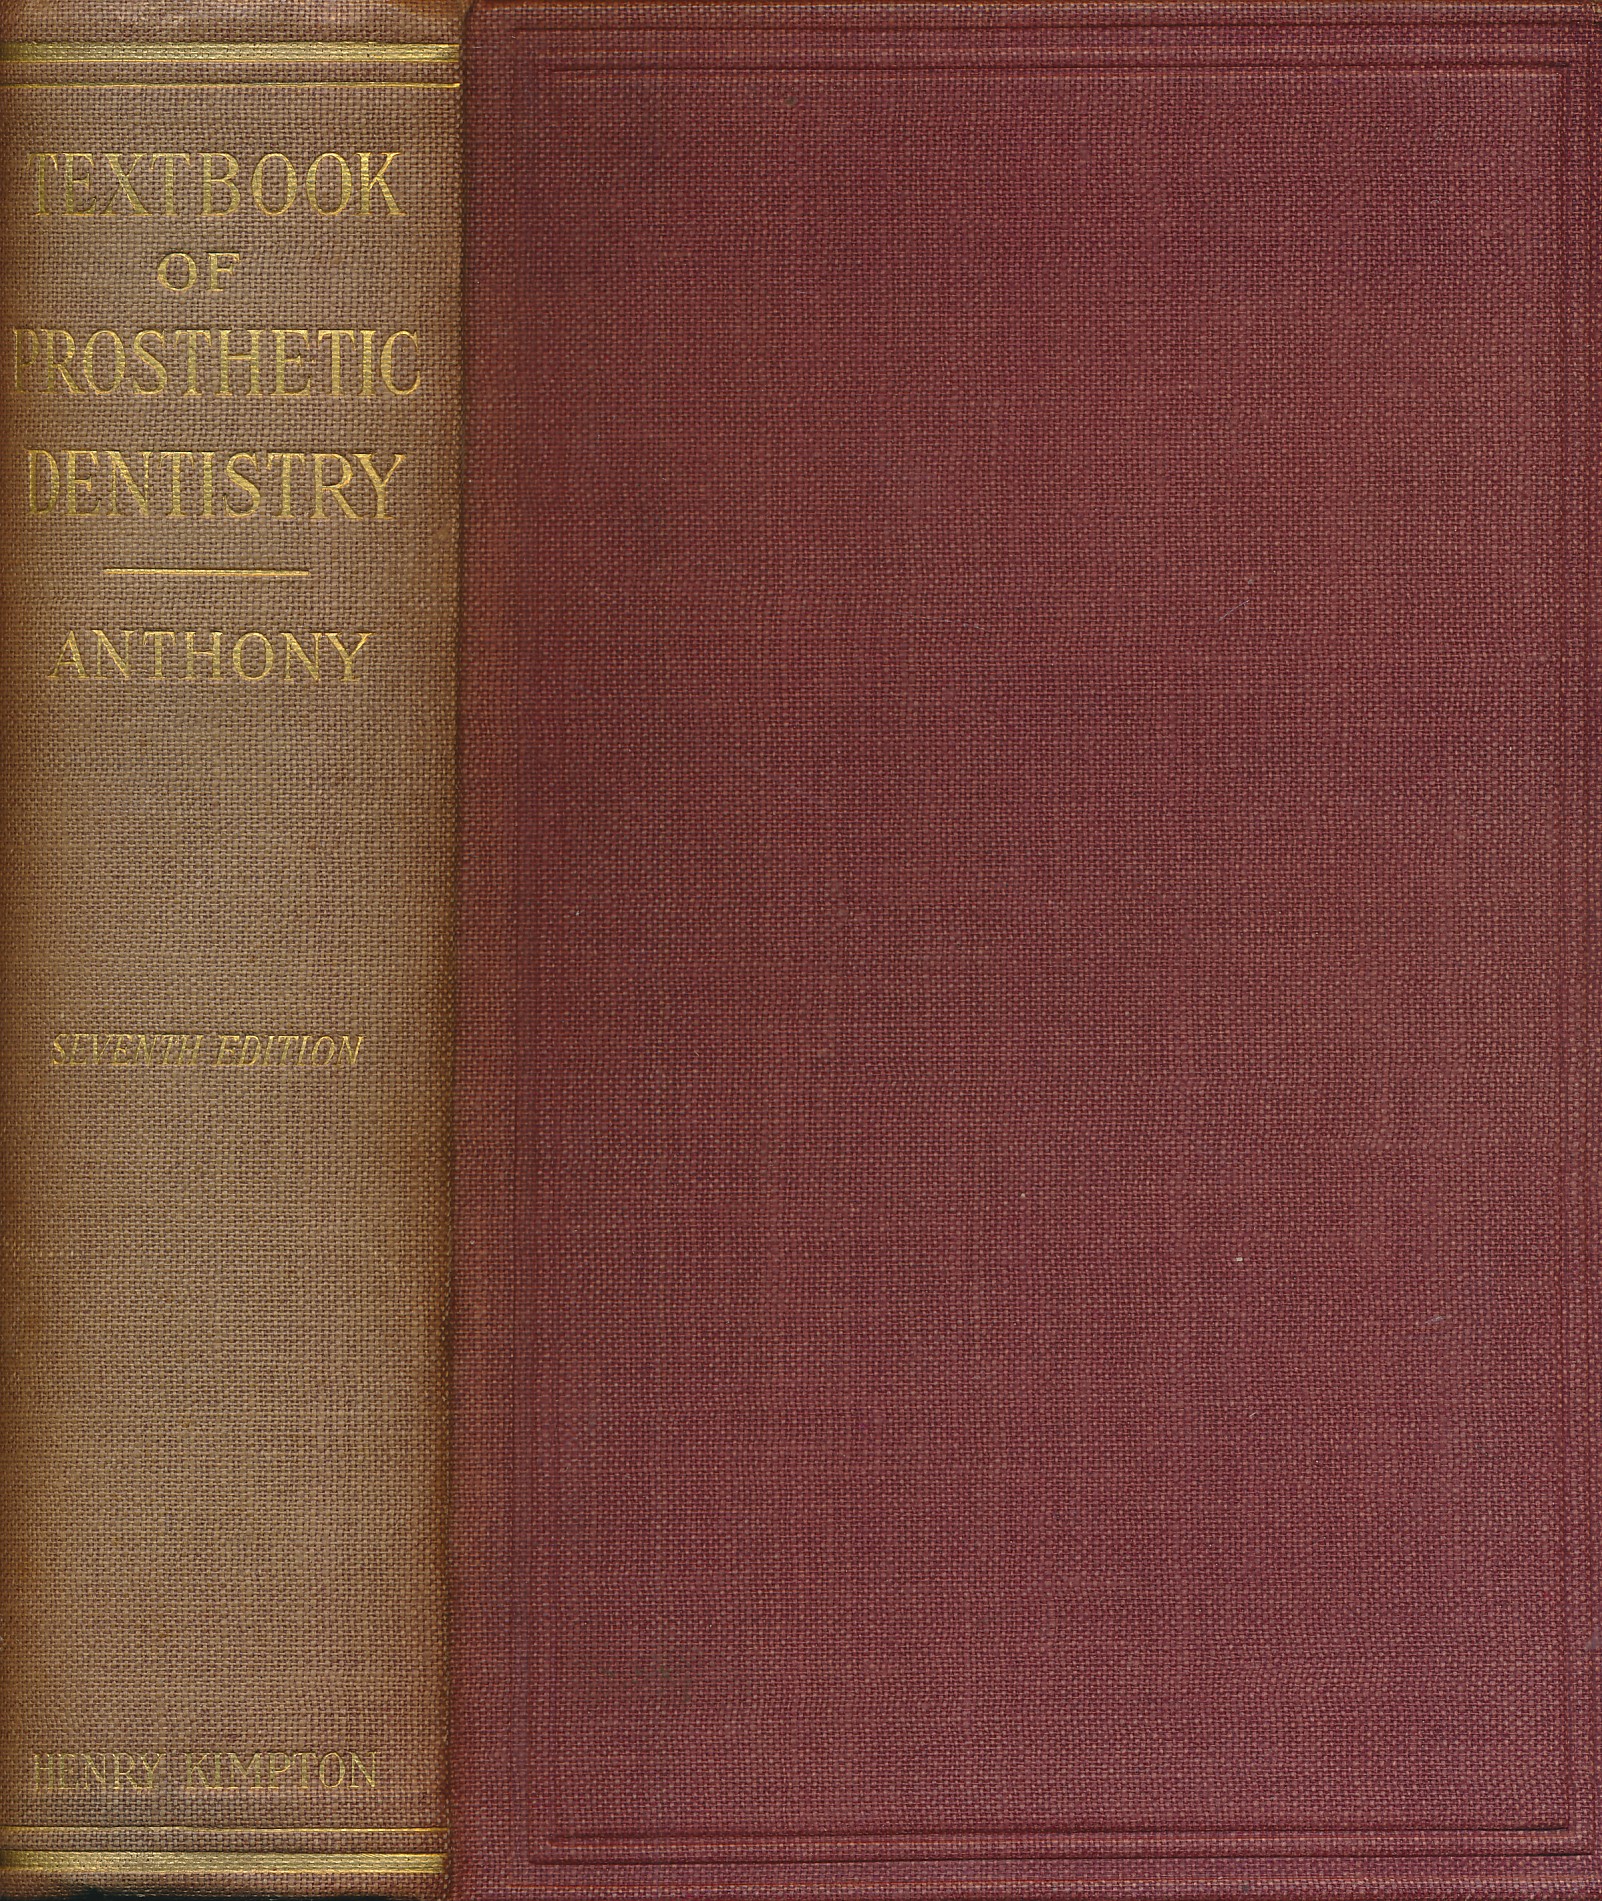 The American Textbook of Prosthetic Dentistry